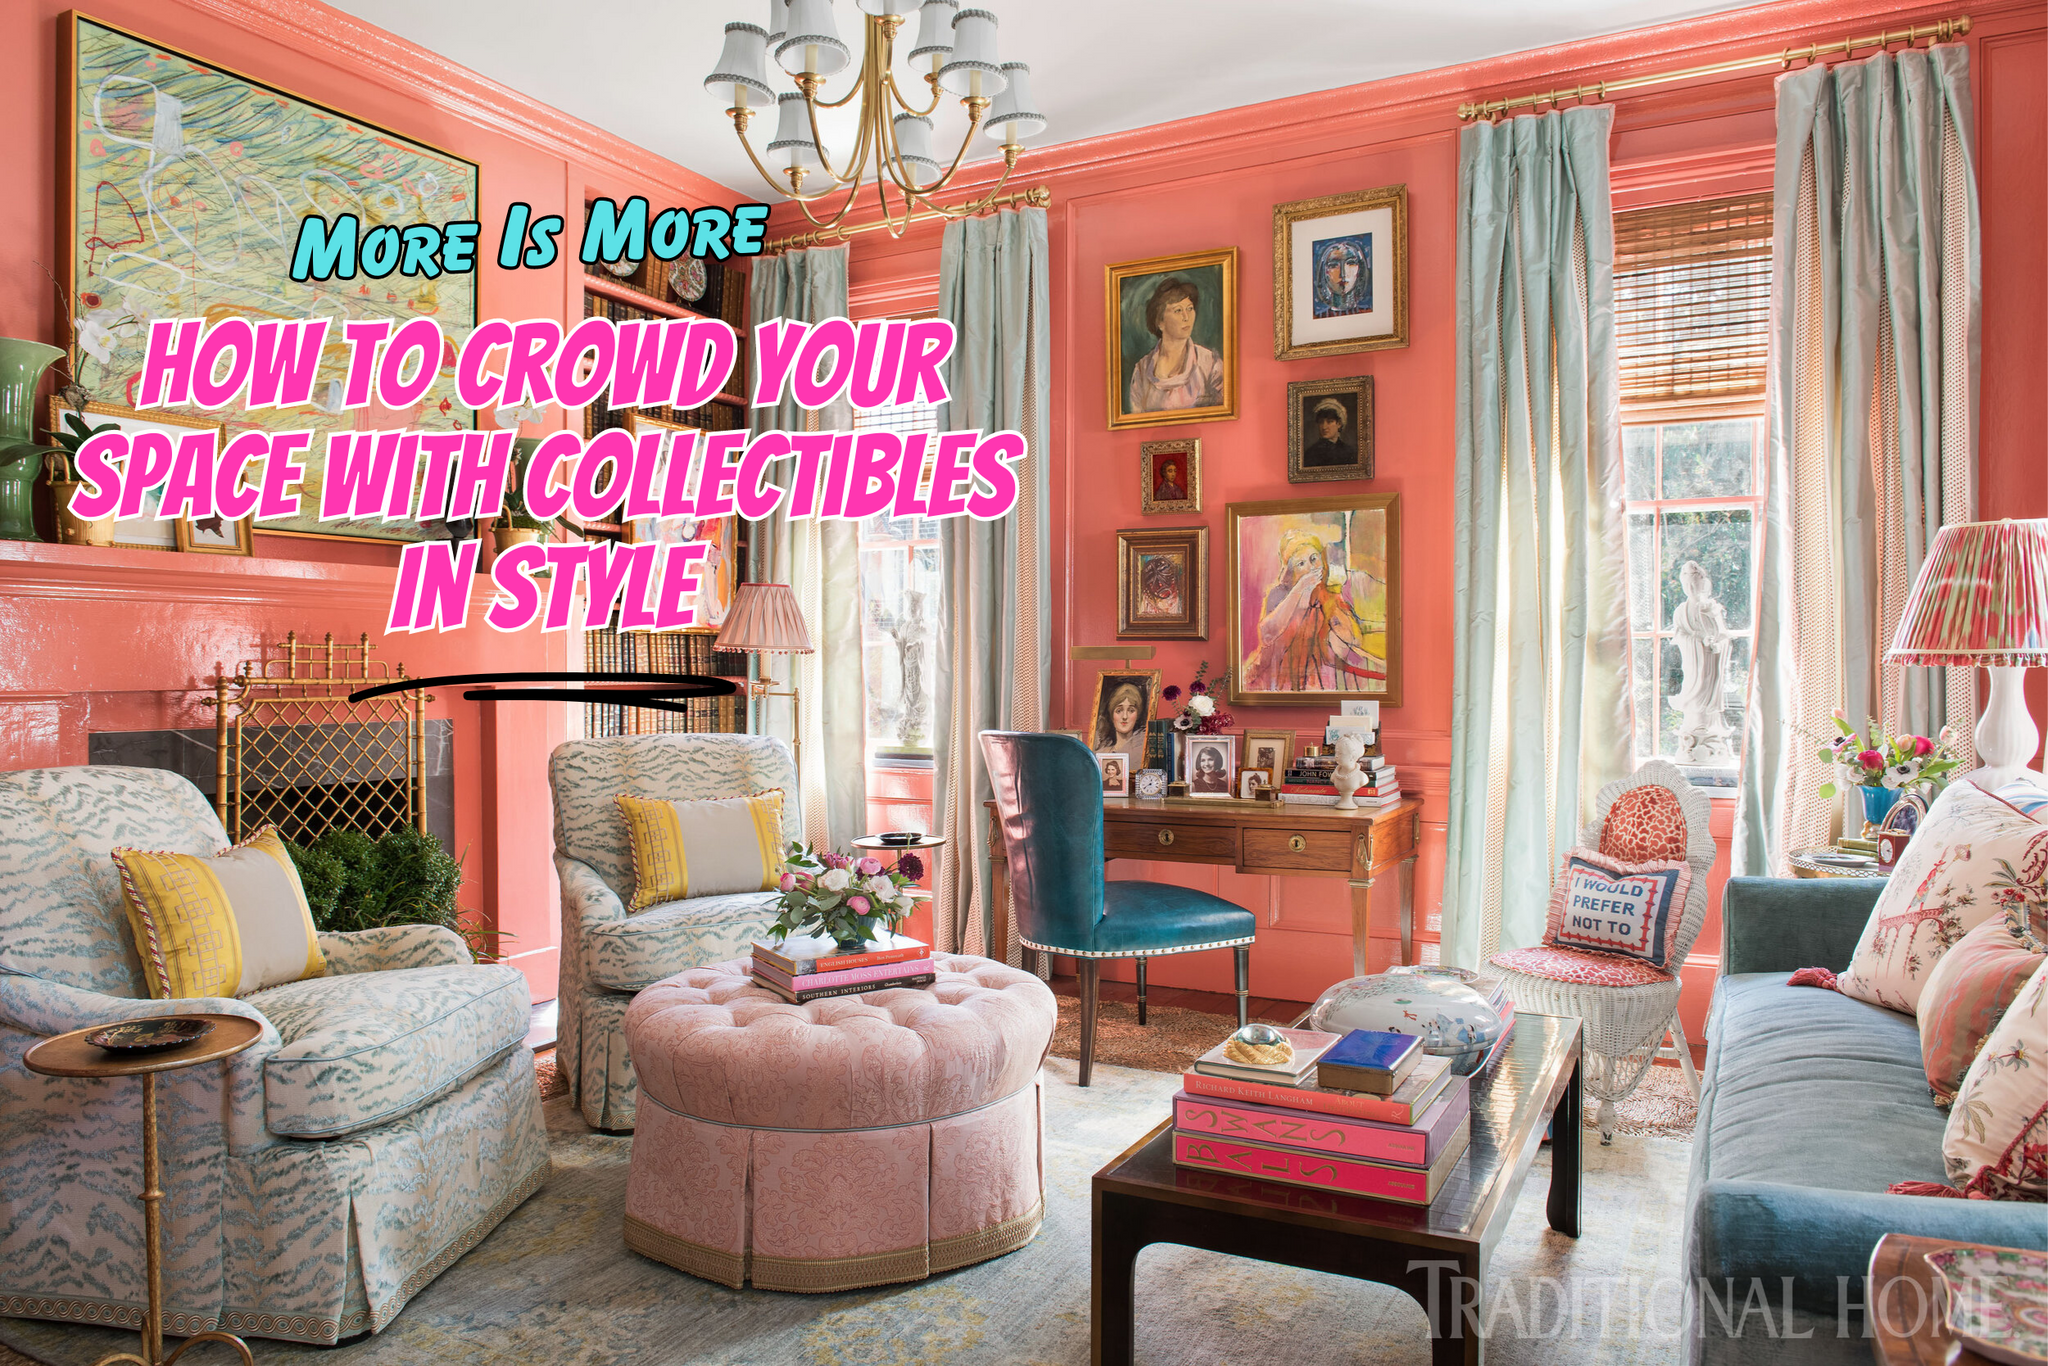 Hot To Crowd Your Space With Collectibles In Style